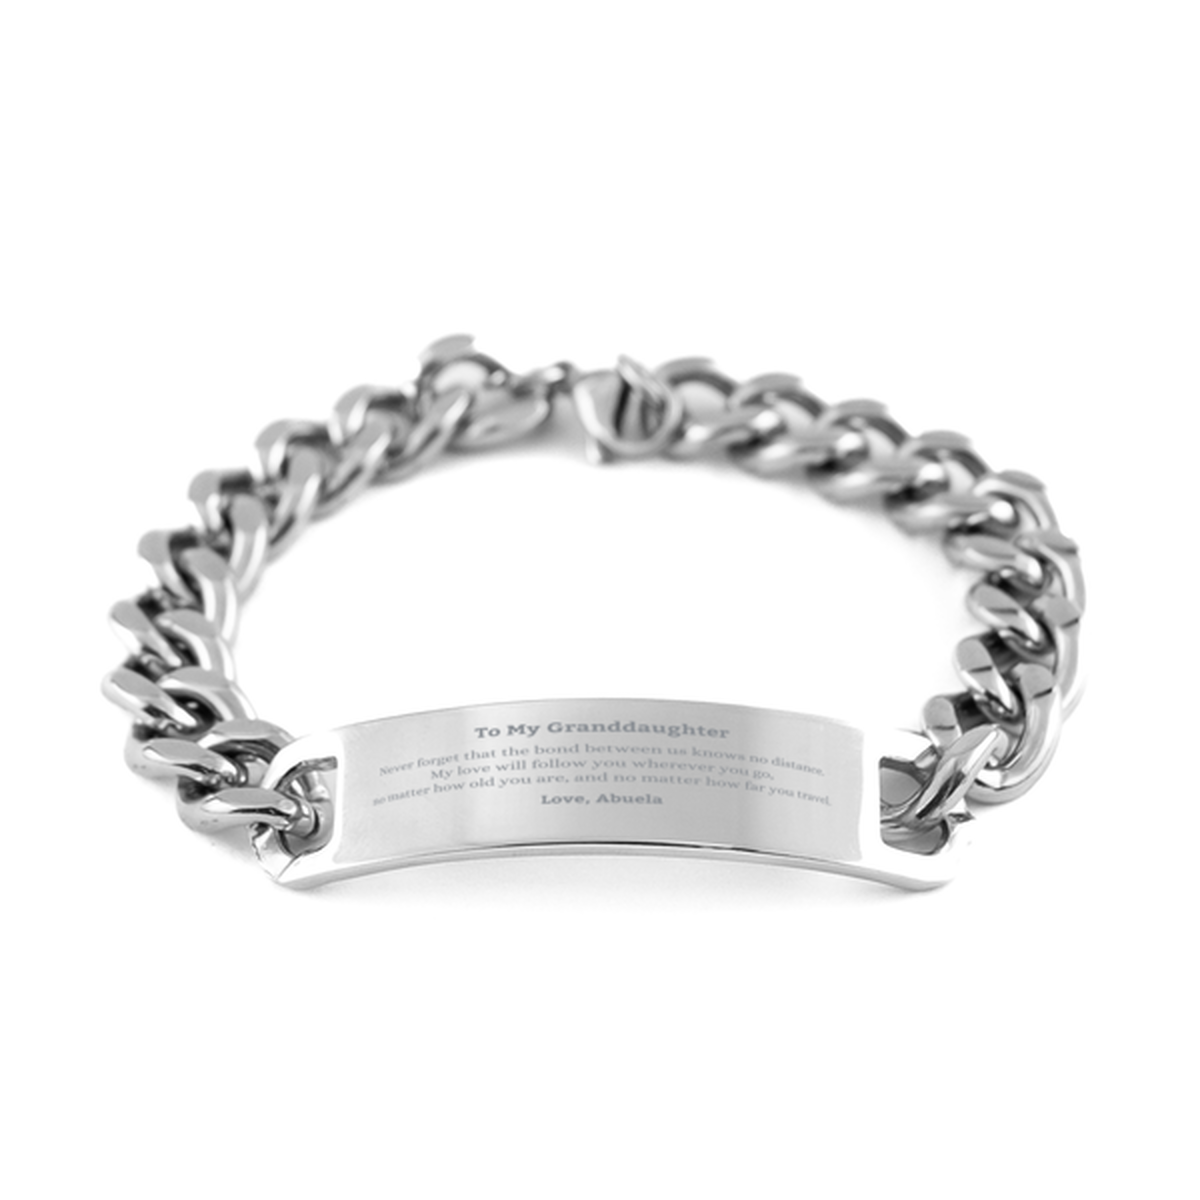 Granddaughter Birthday Gifts from Abuela, Adjustable Cuban Chain Stainless Steel Bracelet for Granddaughter Christmas Graduation Unique Gifts Granddaughter Never forget that the bond between us knows no distance. Love, Abuela